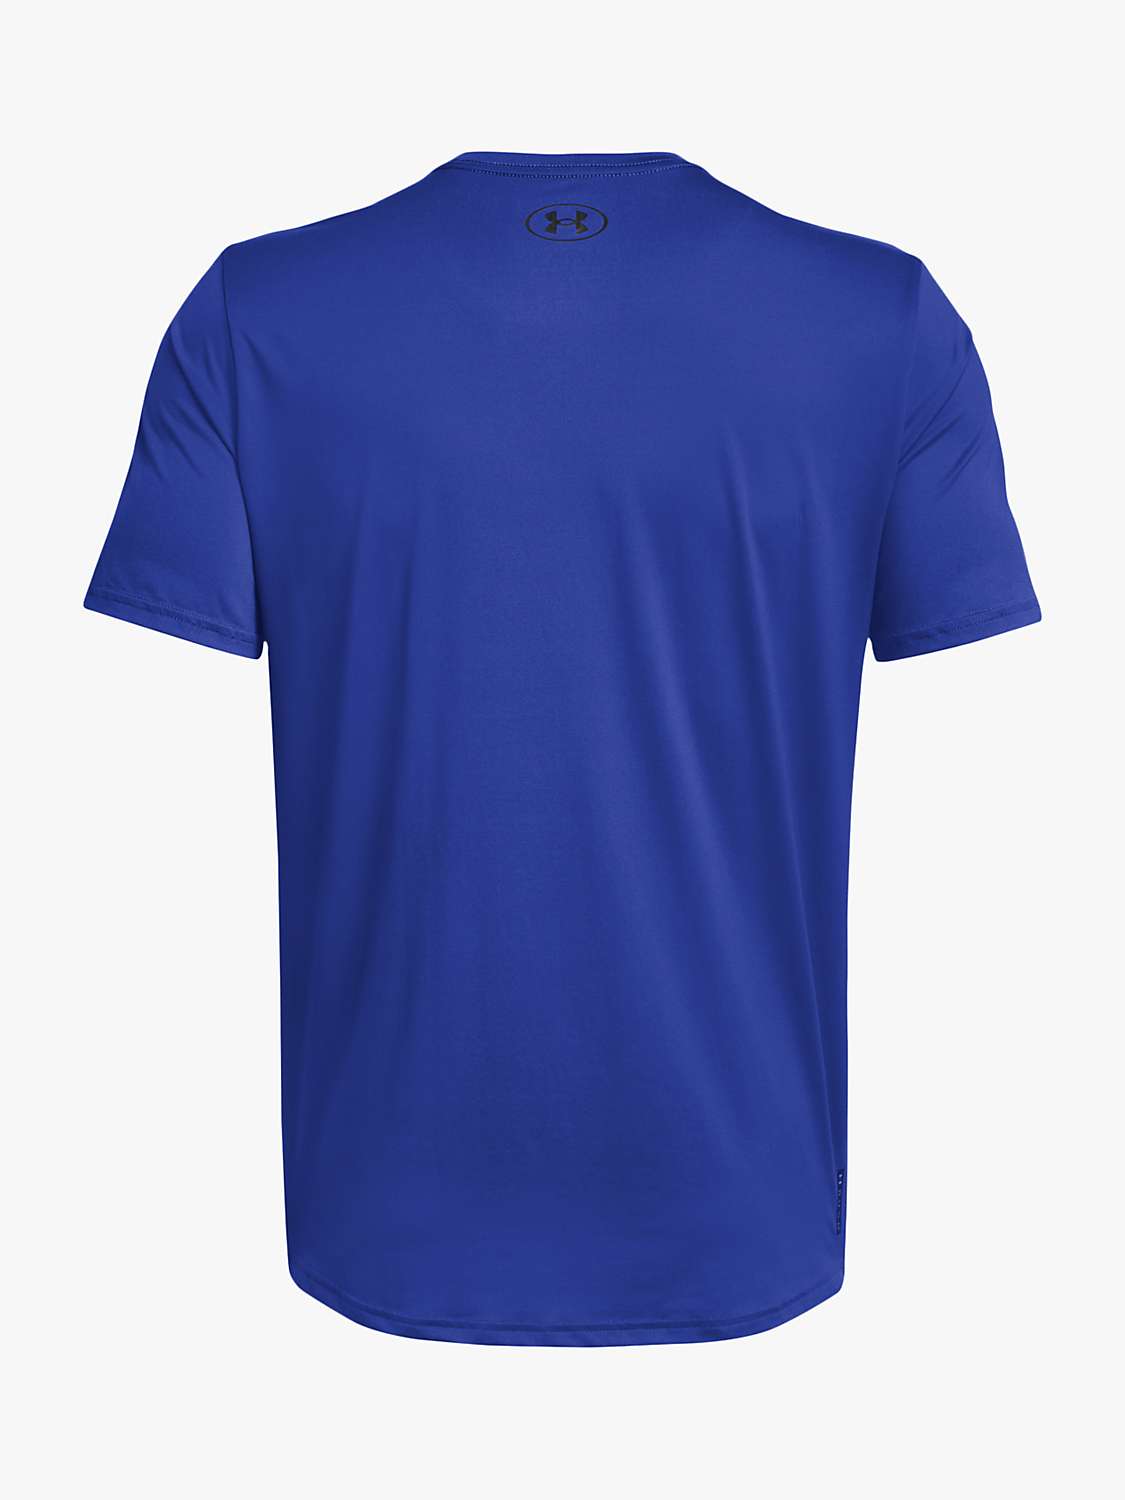 Buy Under Armour Rush Energy Short Sleeve Gym Top Online at johnlewis.com